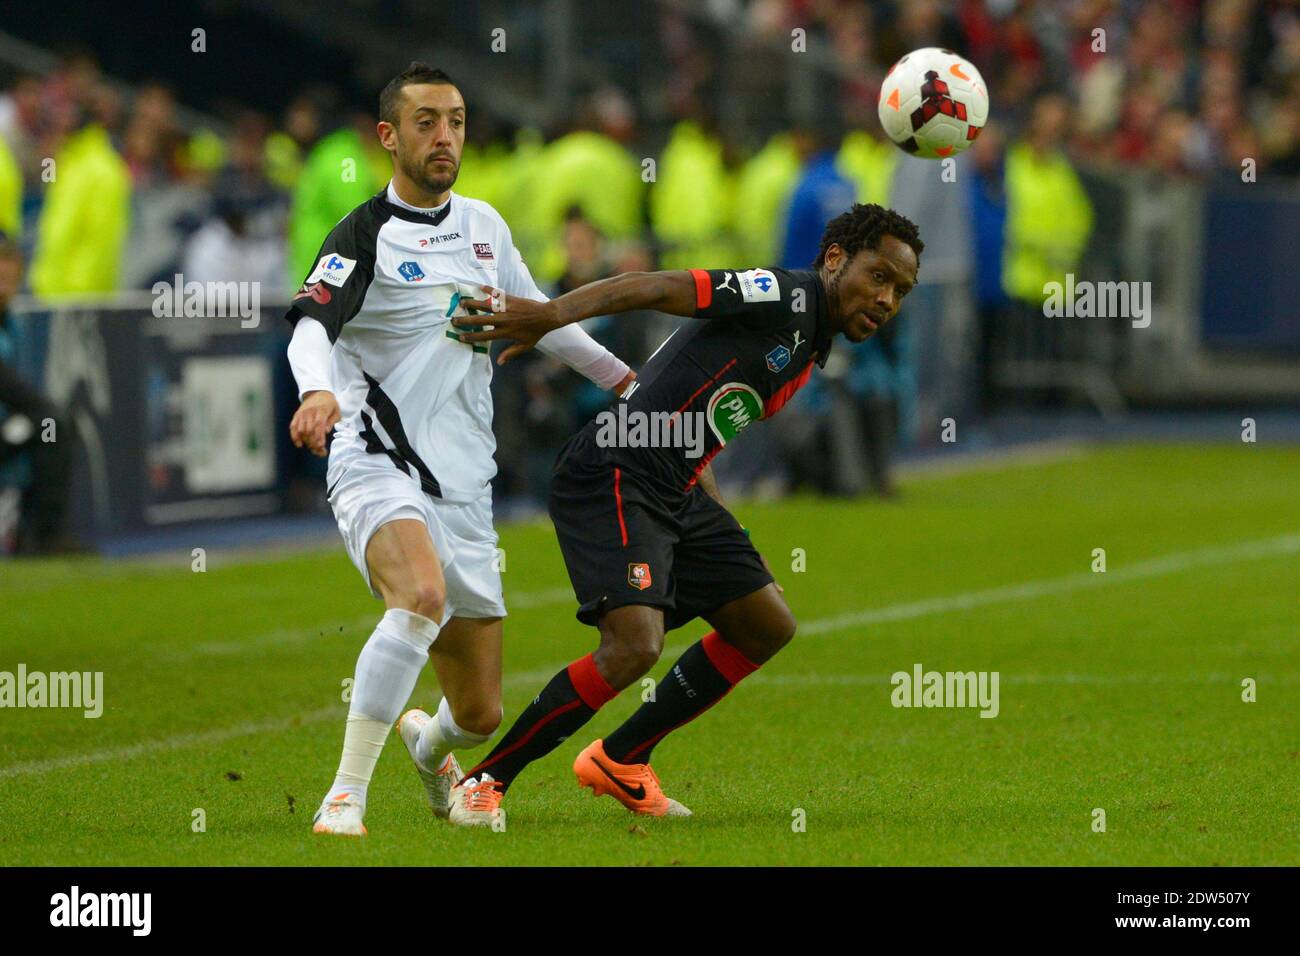 Rennes's Jean II Makoun battling Guingamp's Jonathan Martins Pereira during  the French Cup Final soccer match, Rennes vs Guingamp in Stade de France,  St-Denis, France, on May 3rd, 2014.Guingamp won 2-0. Photo